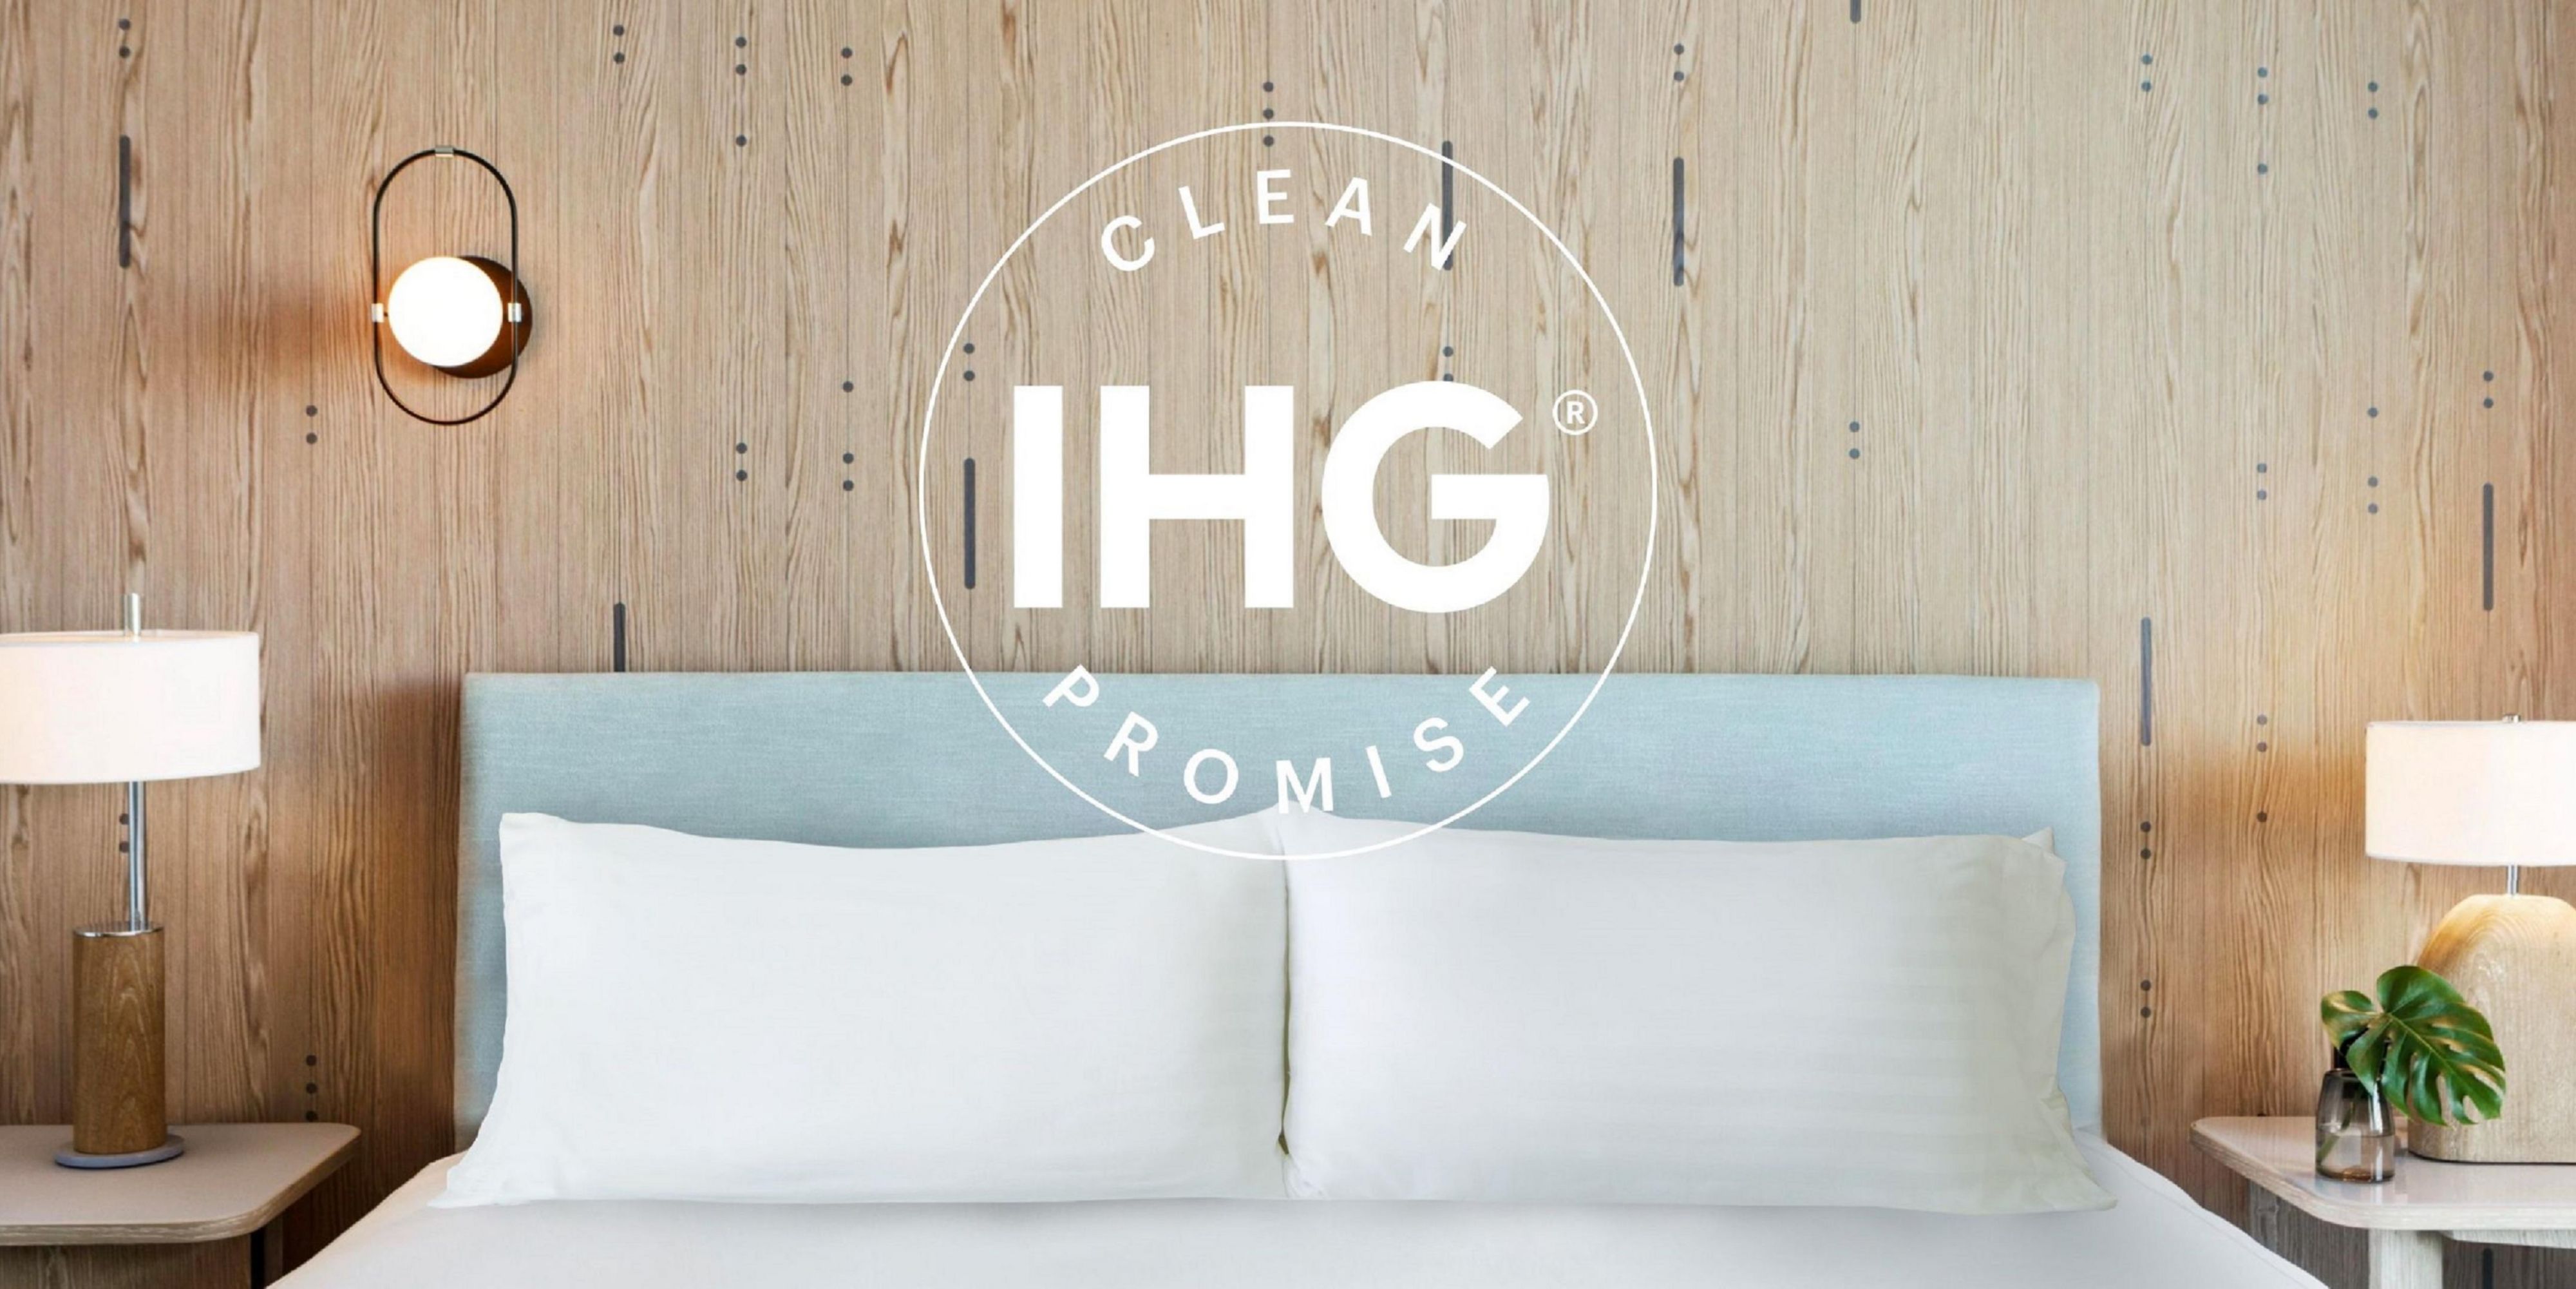 As the world adjusts to new travel norms and expectations, we’re enhancing the experience for  our hotel guests  by redefining cleanliness and supporting your wellbeing throughout your stay.